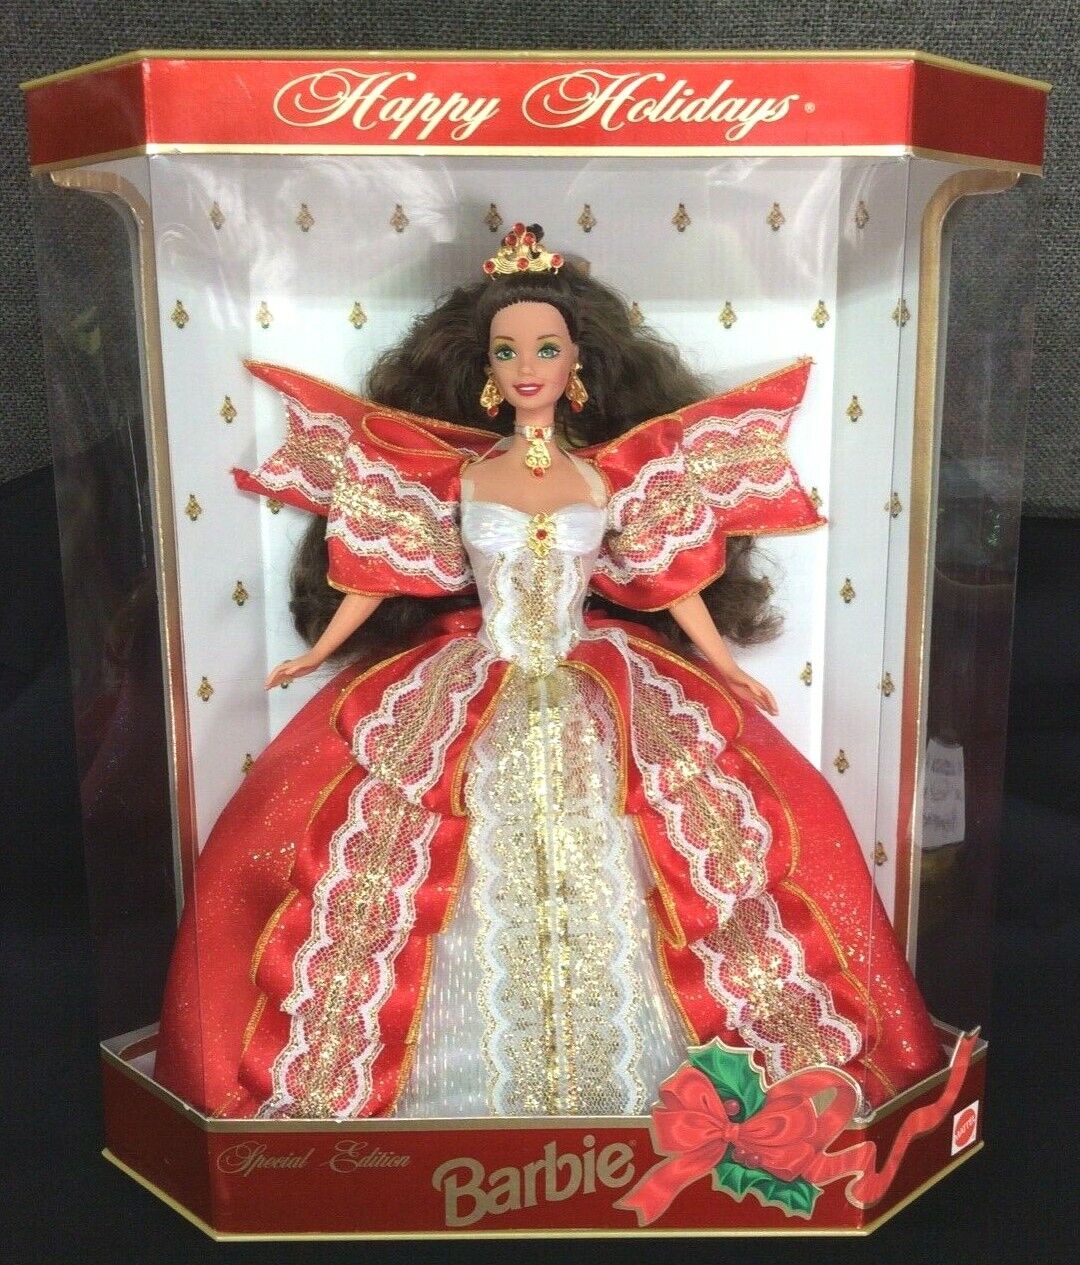 Happy Holidays 1997 Special Edition Barbie 10th Anniversary for sale online 